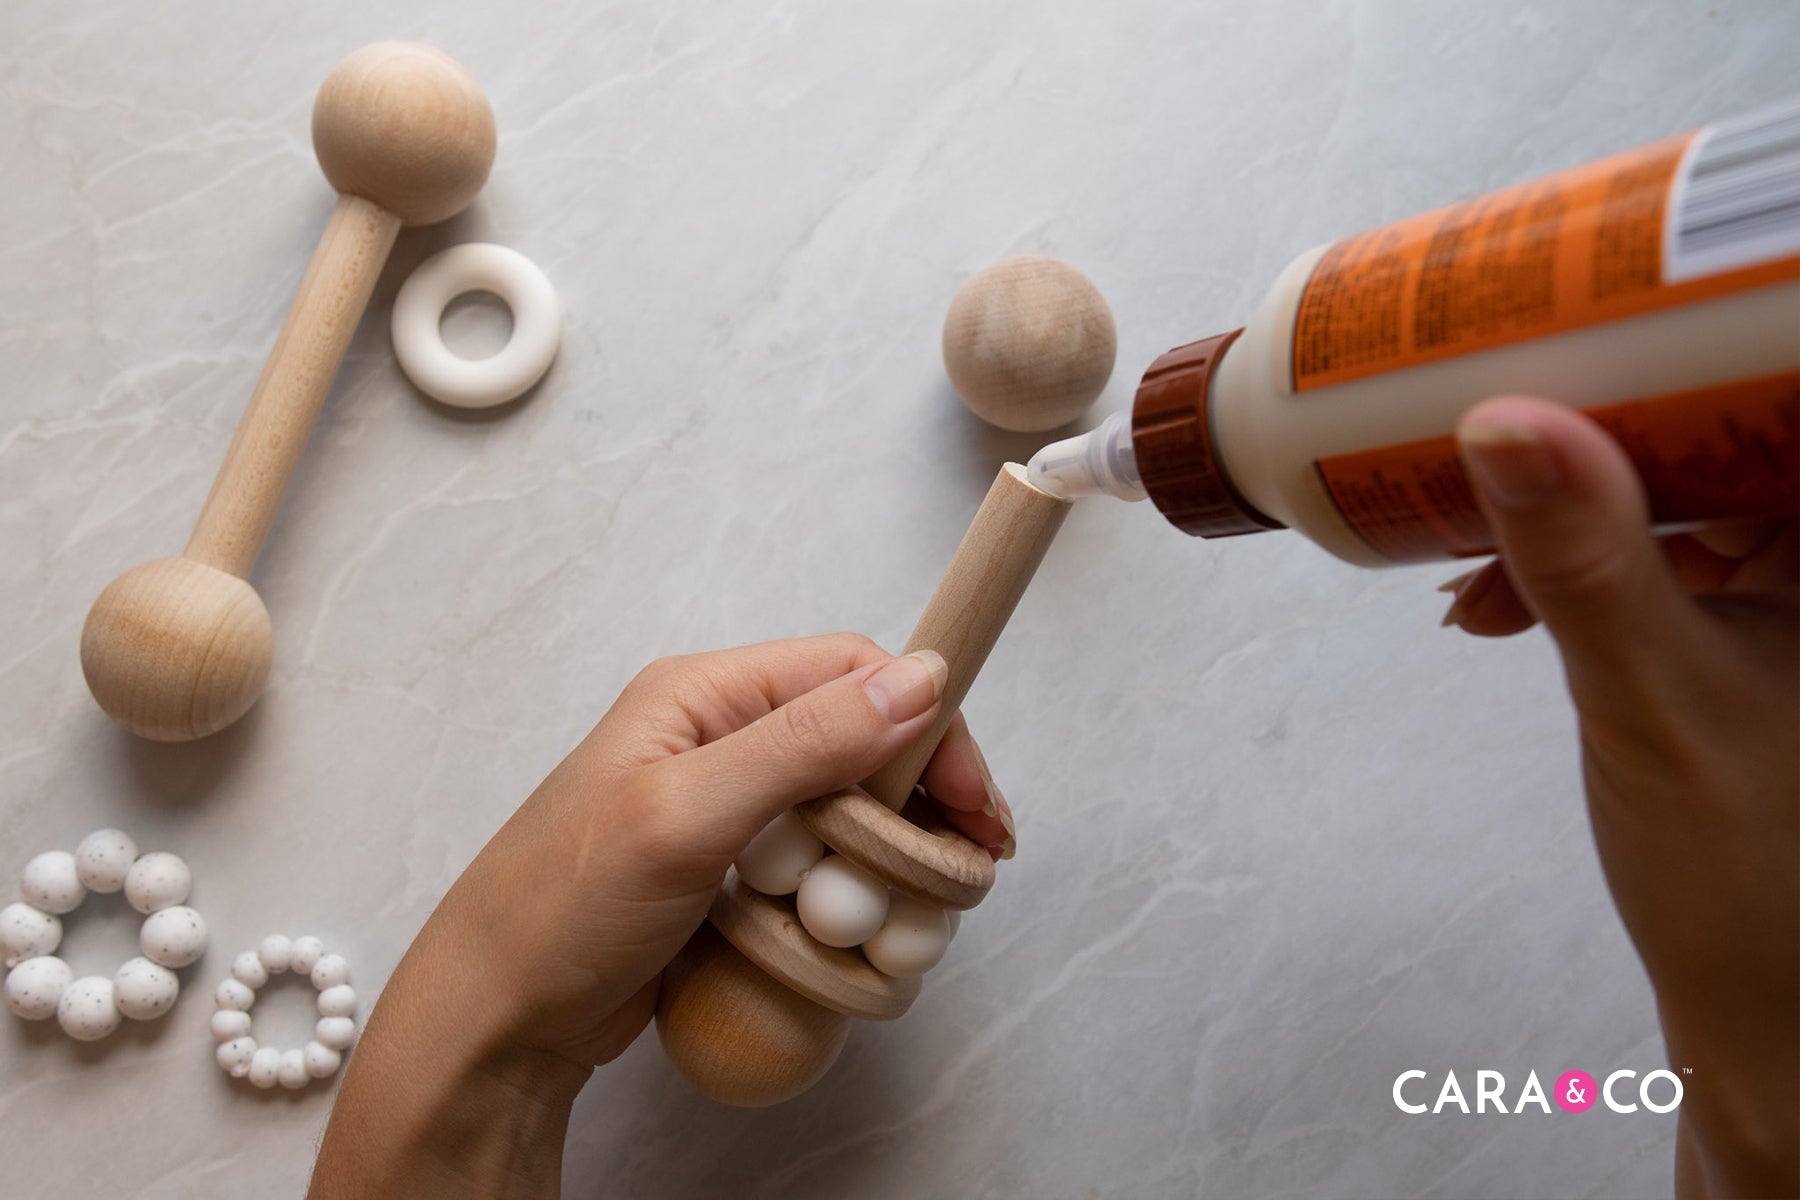 DIY Wood Rattle Kit - Timeless Classic Baby Toy - Cara & Co